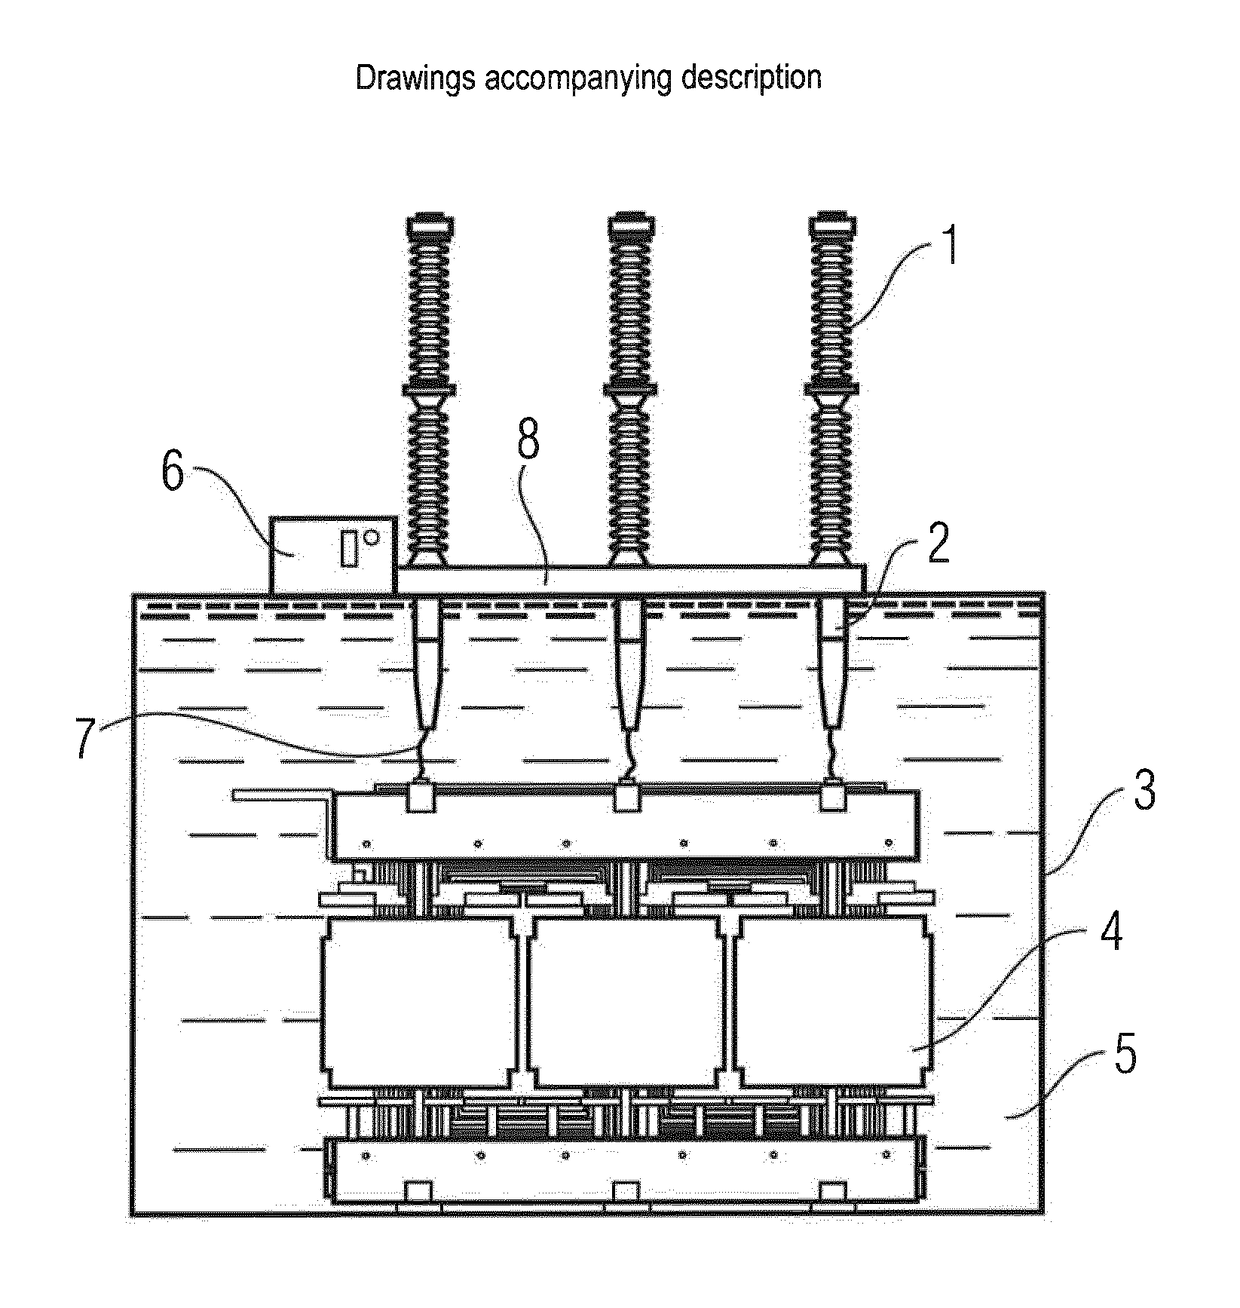 High-voltage combined electrical apparatus